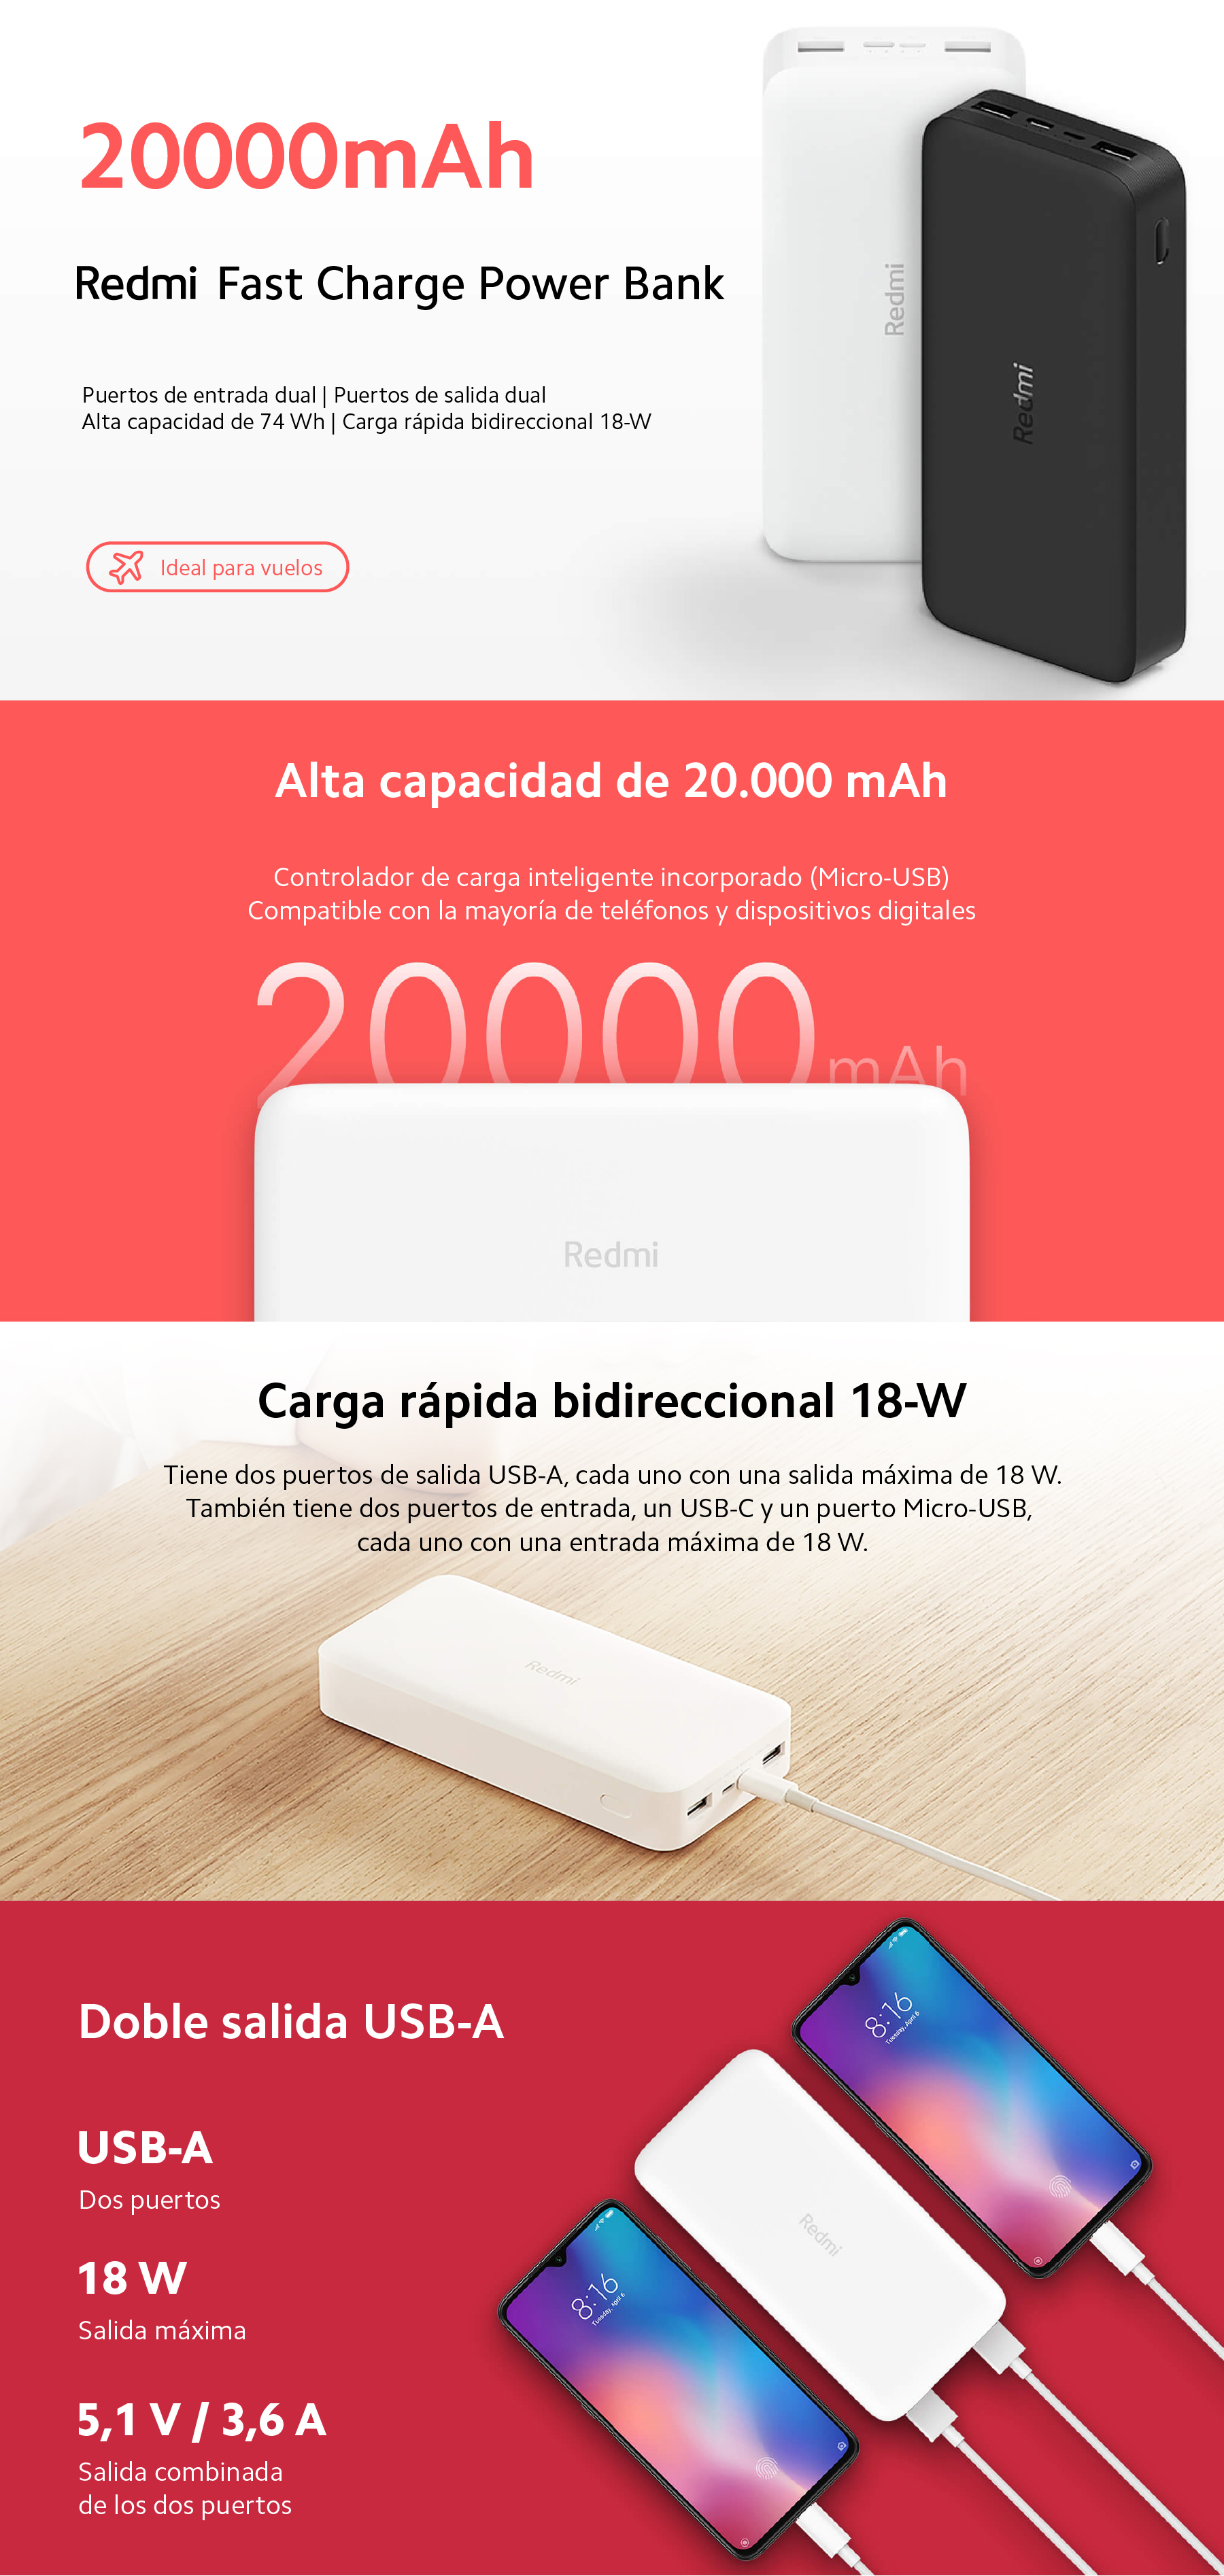 Redmi Fast Charge Power Bank 20000